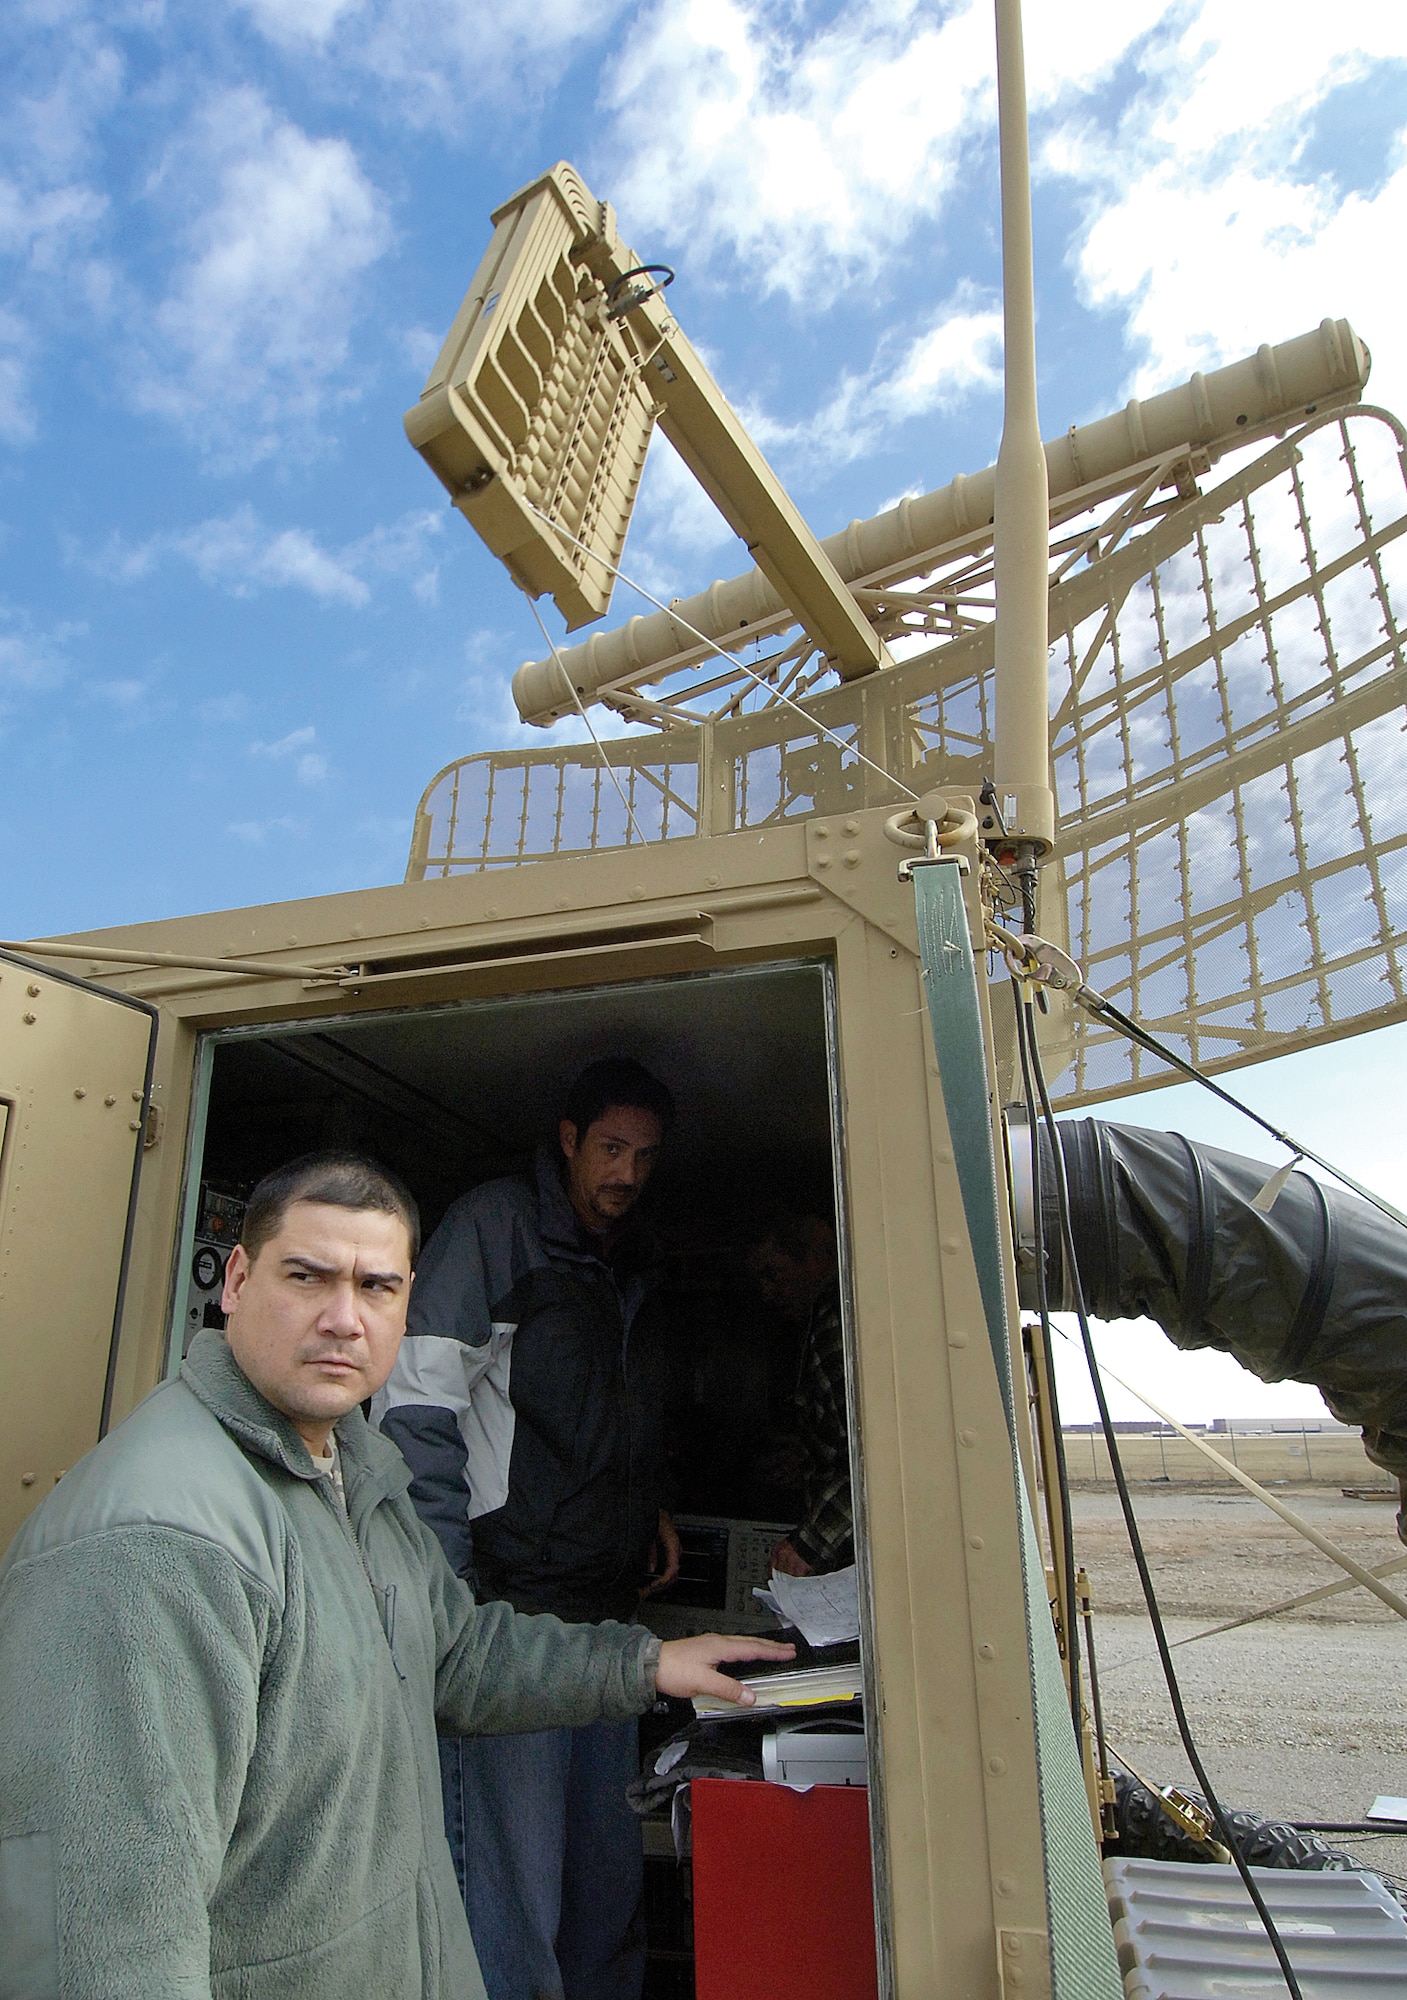 Staff Sgt. Sean Jones and other 32nd Combat Communications Squadron personnel test a TPN-19 radar system that will be sent with members of the squadron to Haiti in support of recovery efforts to the battered area. (Air Force photo by Margo Wright)